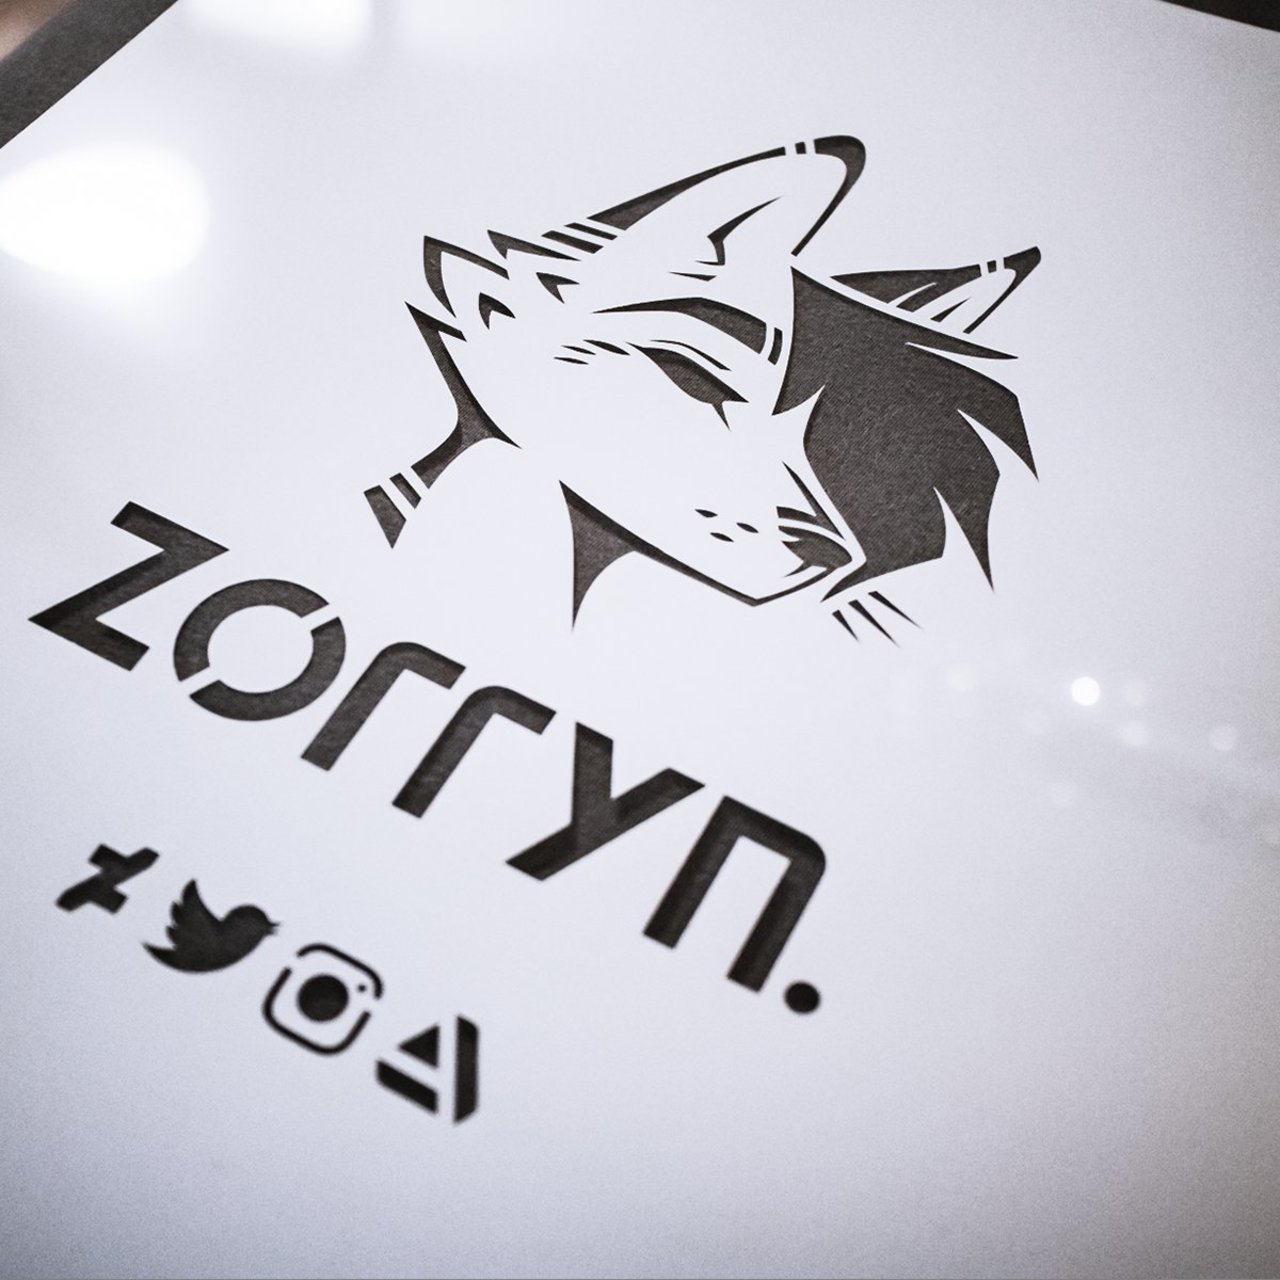 Woohoo - my spray #stencil just arrived :D  Laser engraved on 3mm PVC foil. I will put it to use on some cardboard boxes and paper bags for #Eurofurence! #zorryn #stencil #spraypaint #decoration #logo #lasercutter #tag #tagging #graffiti #art #anthro #transduced #graffart https://t.co/FV3HqTzdA2